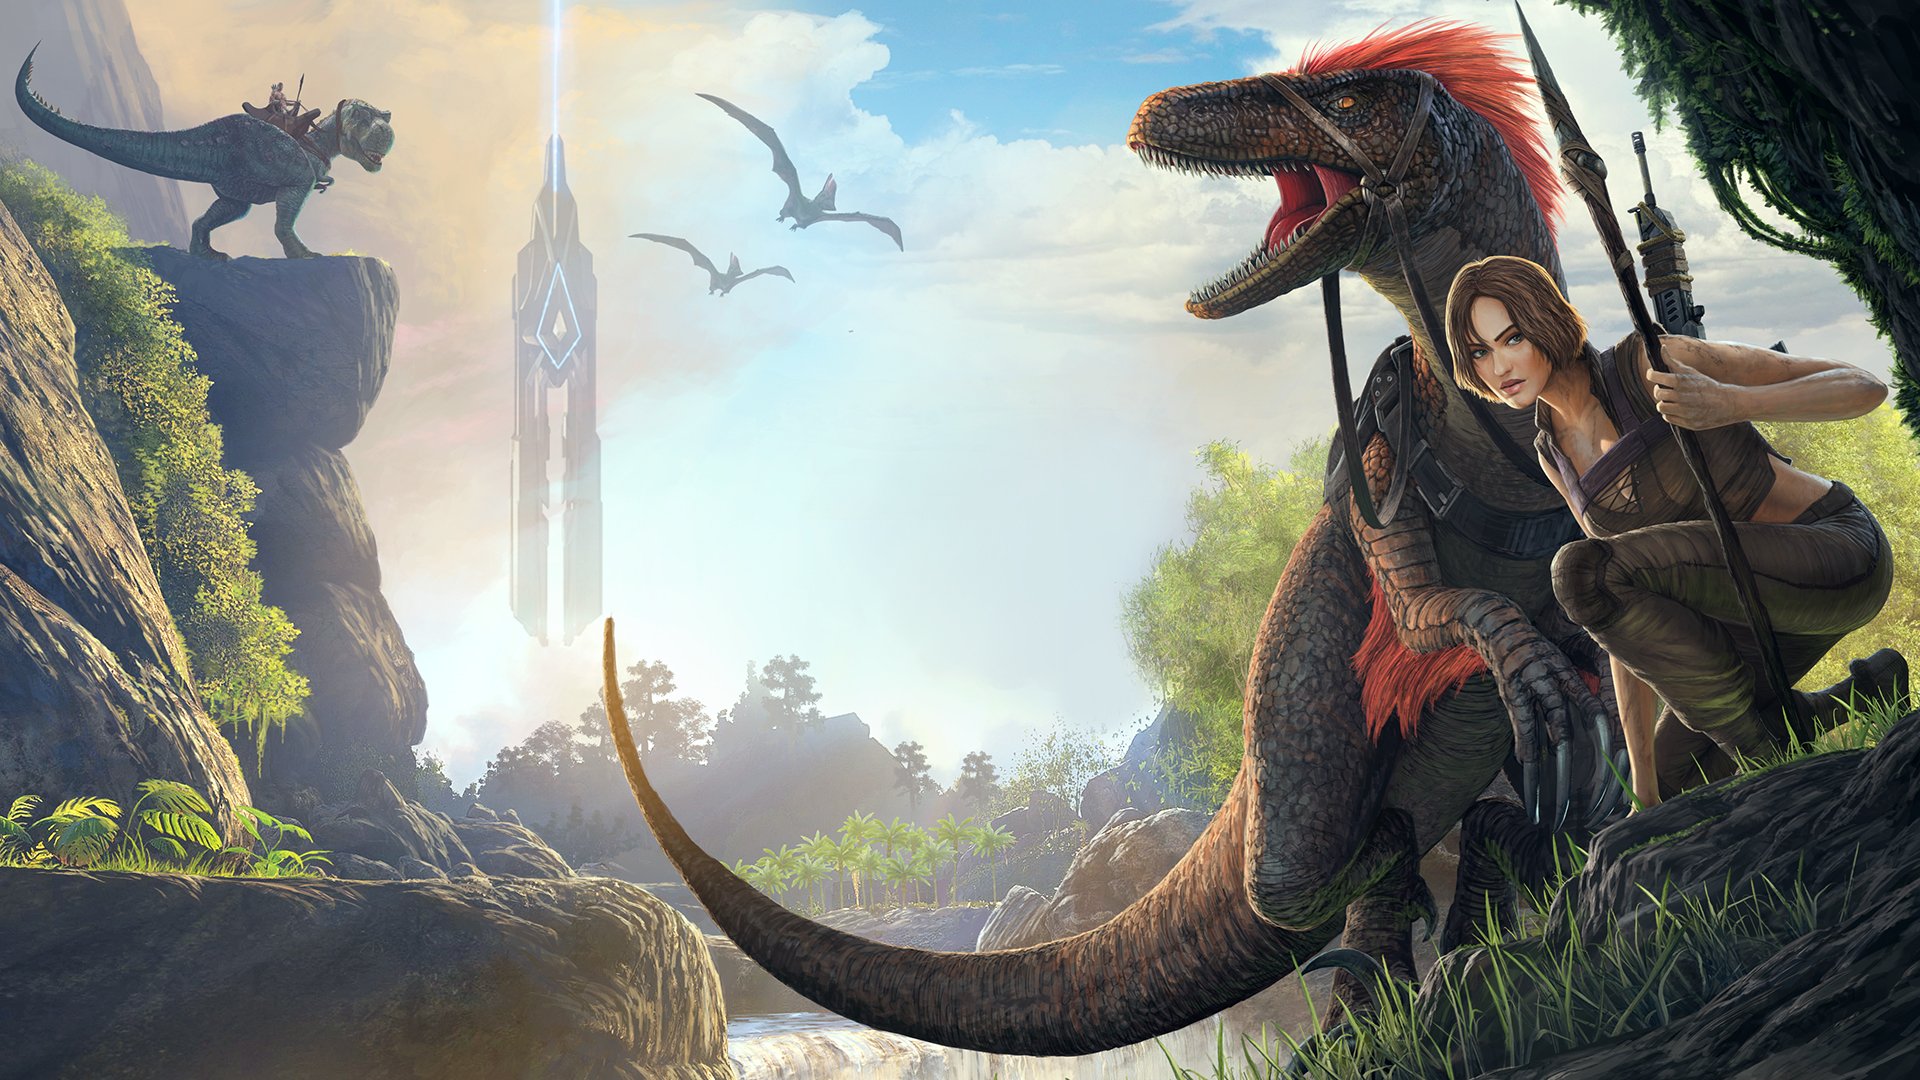 Ark Survival Evolved Ark Survival Evolved Has Increased Its Price On Steam To Ensure Retail Parity For The Upcoming Launch T Co Hx1fad9f5c T Co Joaoznxi41 Twitter